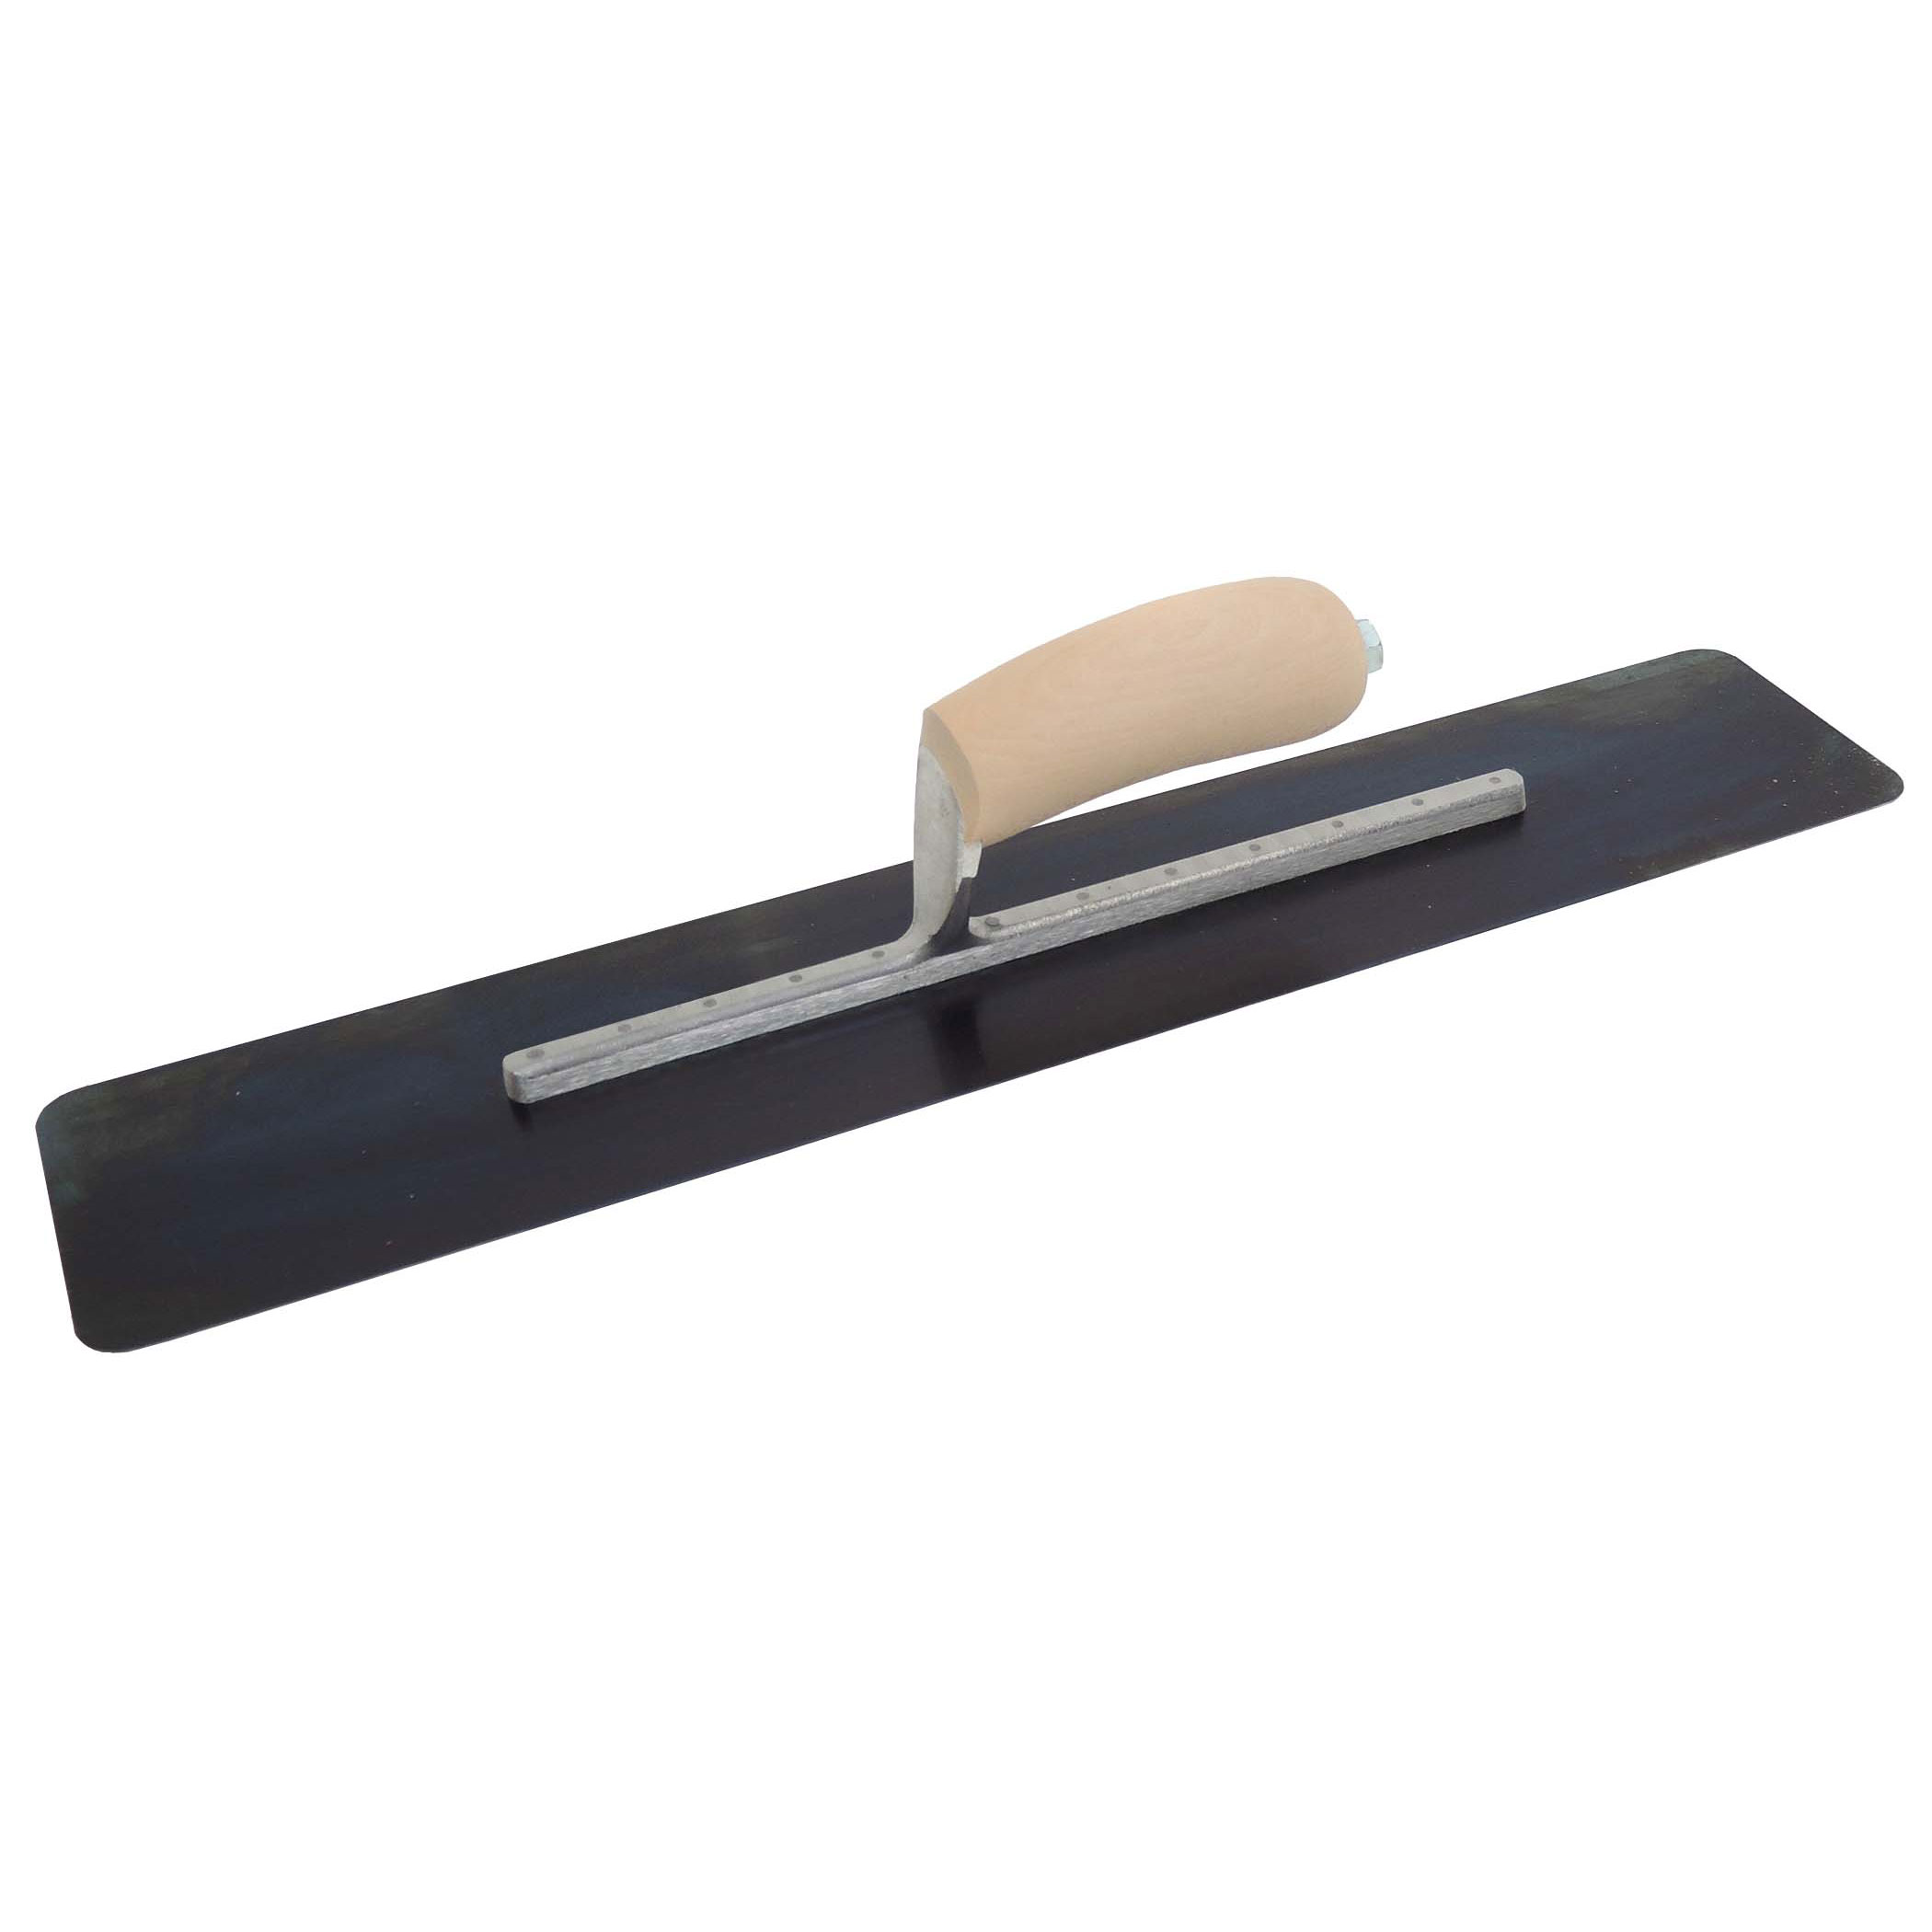 Marshalltown SP20BSER12 20in x 4in Flat End Trowel with Exposed Rivet Trowels and Wood Handle SP20BSER12